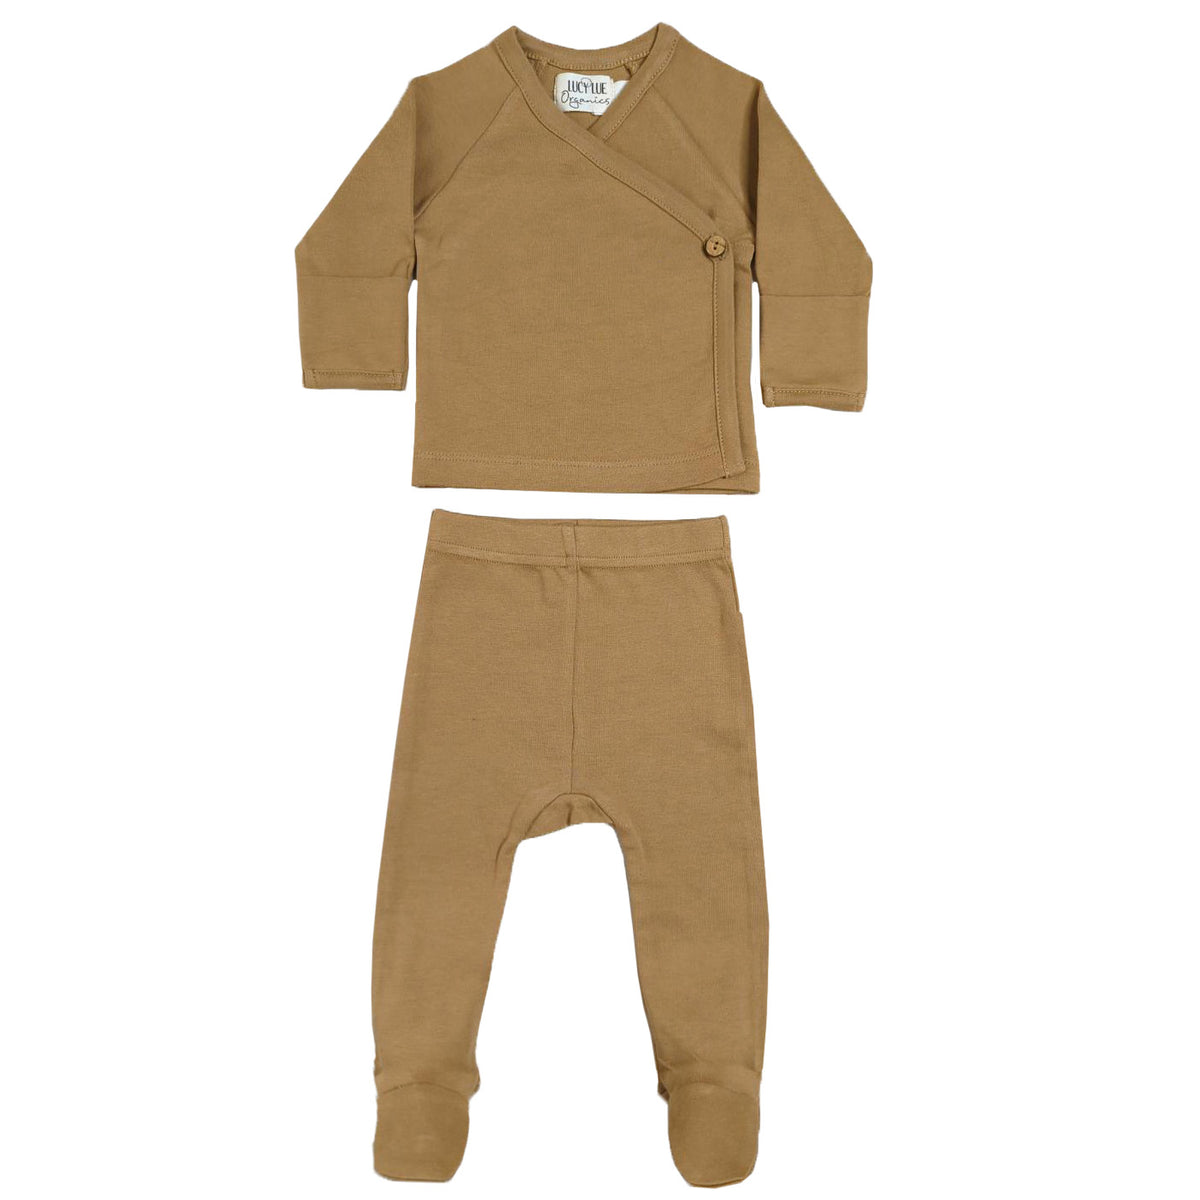 long sleeve newborn wrap top, footed pant set, organic cotton, soft, cozy, button closure, comfy pants, warm, adorable, eco-friendly, durable, waffle cotton, snug, stylish, baby, wardrobe, environmentally friendly, comfort, style, newborn must-have,